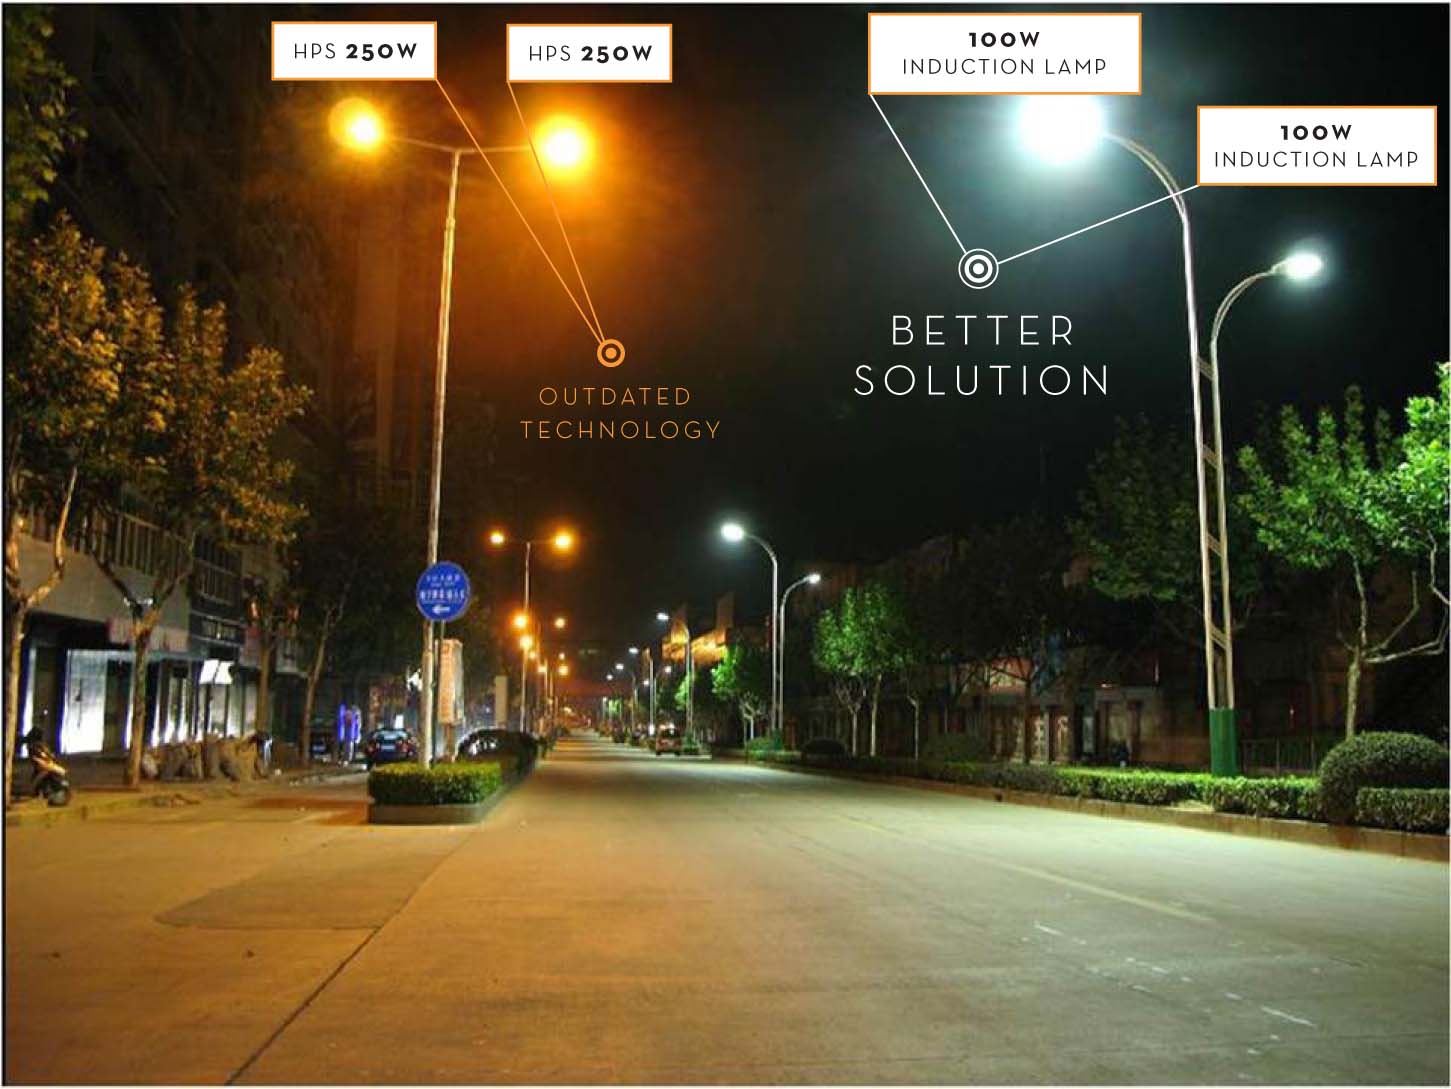 INDUCTION LIGHTING ON STREET LAMPS